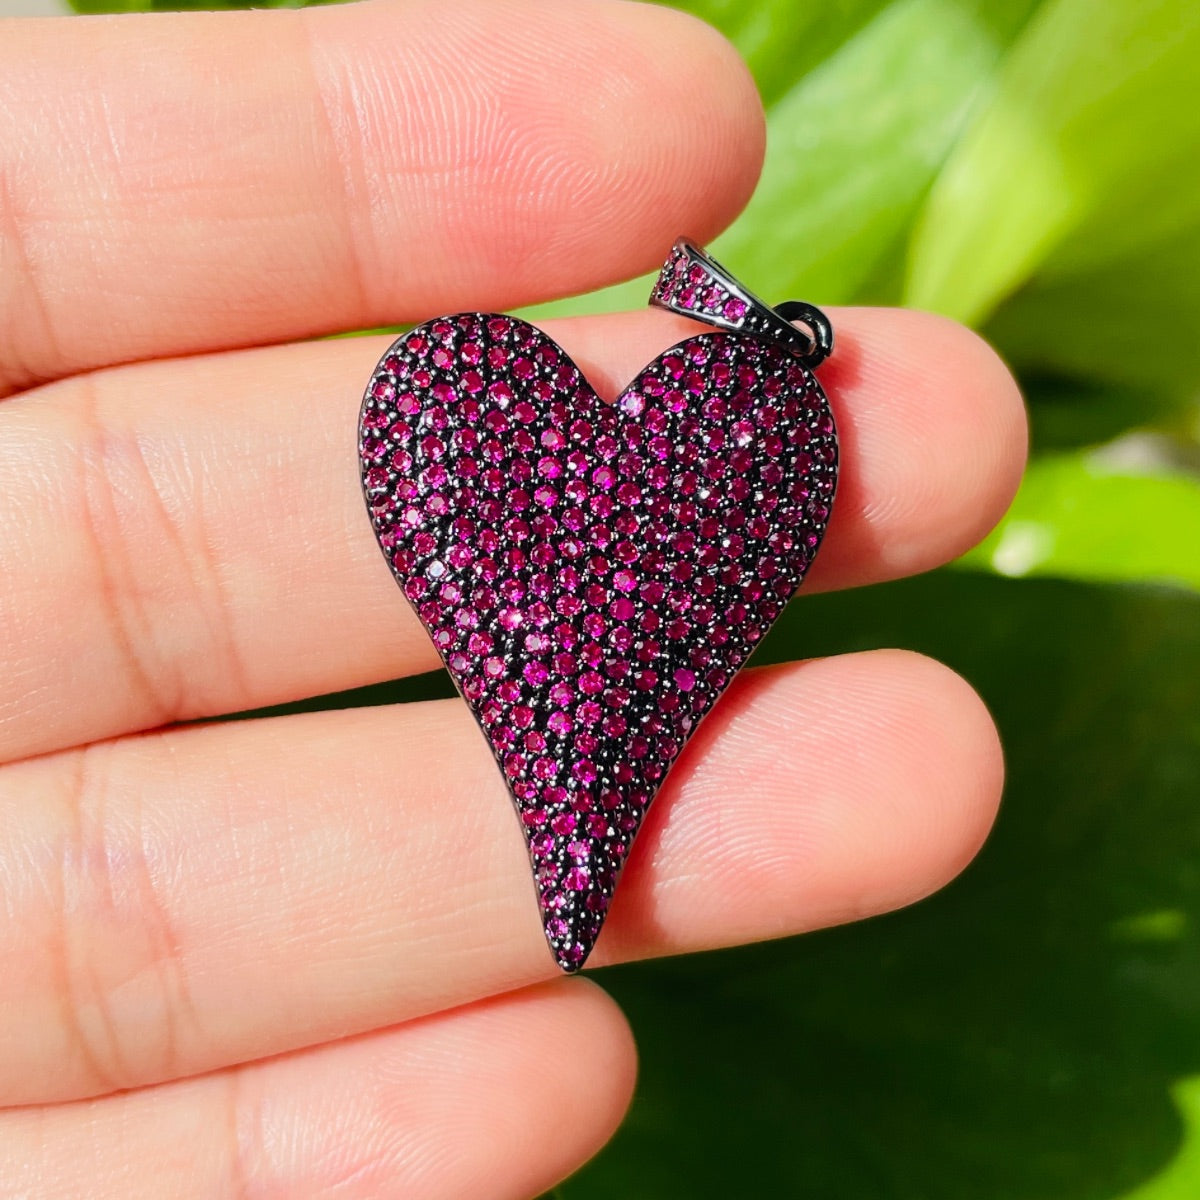 5pcs/lot 40*23.5mm CZ Paved Fuchsia Green Blue Heart Charms Fuchsia on Black CZ Paved Charms Colorful Zirconia Hearts New Charms Arrivals Charms Beads Beyond